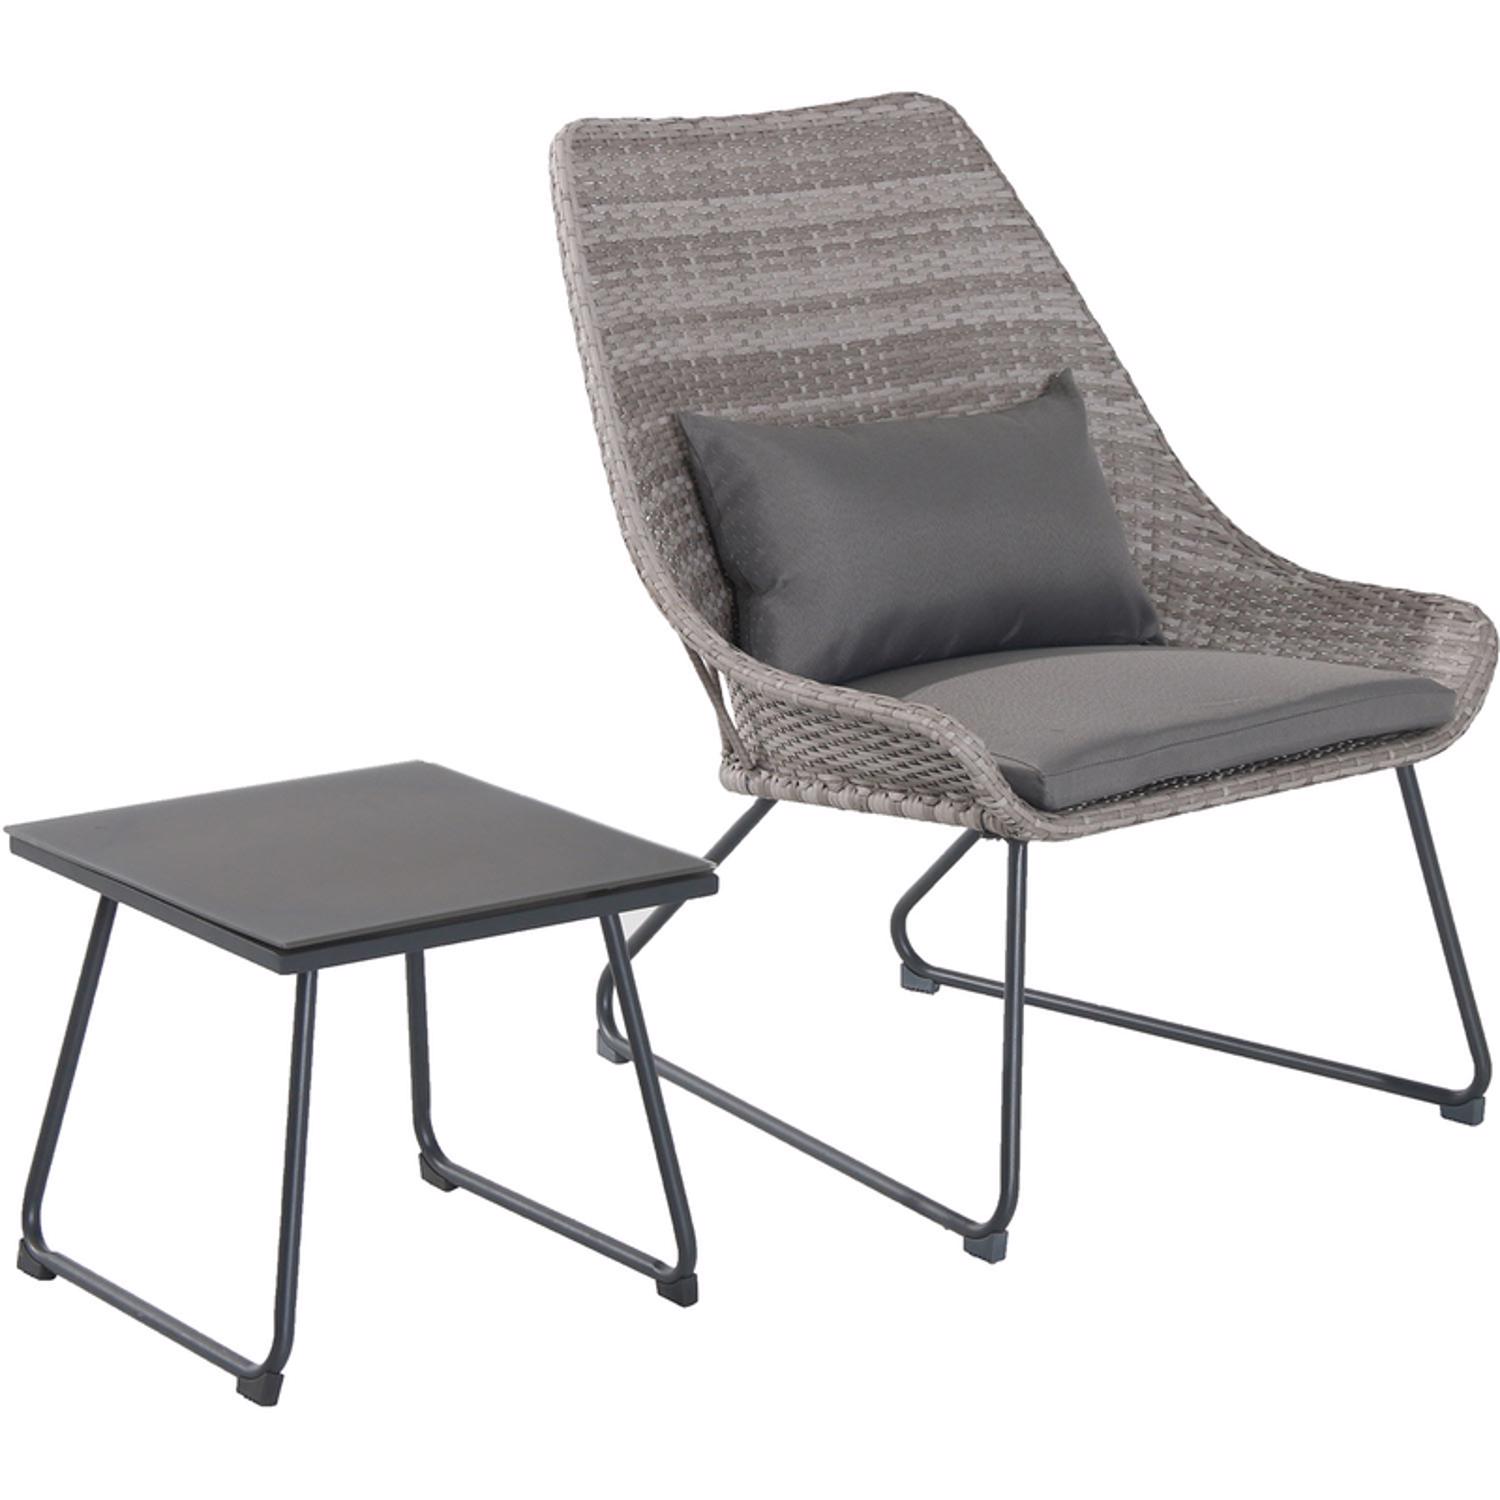 Photos - Garden Furniture Hanover Modern Scoop 3 pc Gray Steel Modern Chat Set Gray ACCENT3PC-GRY 